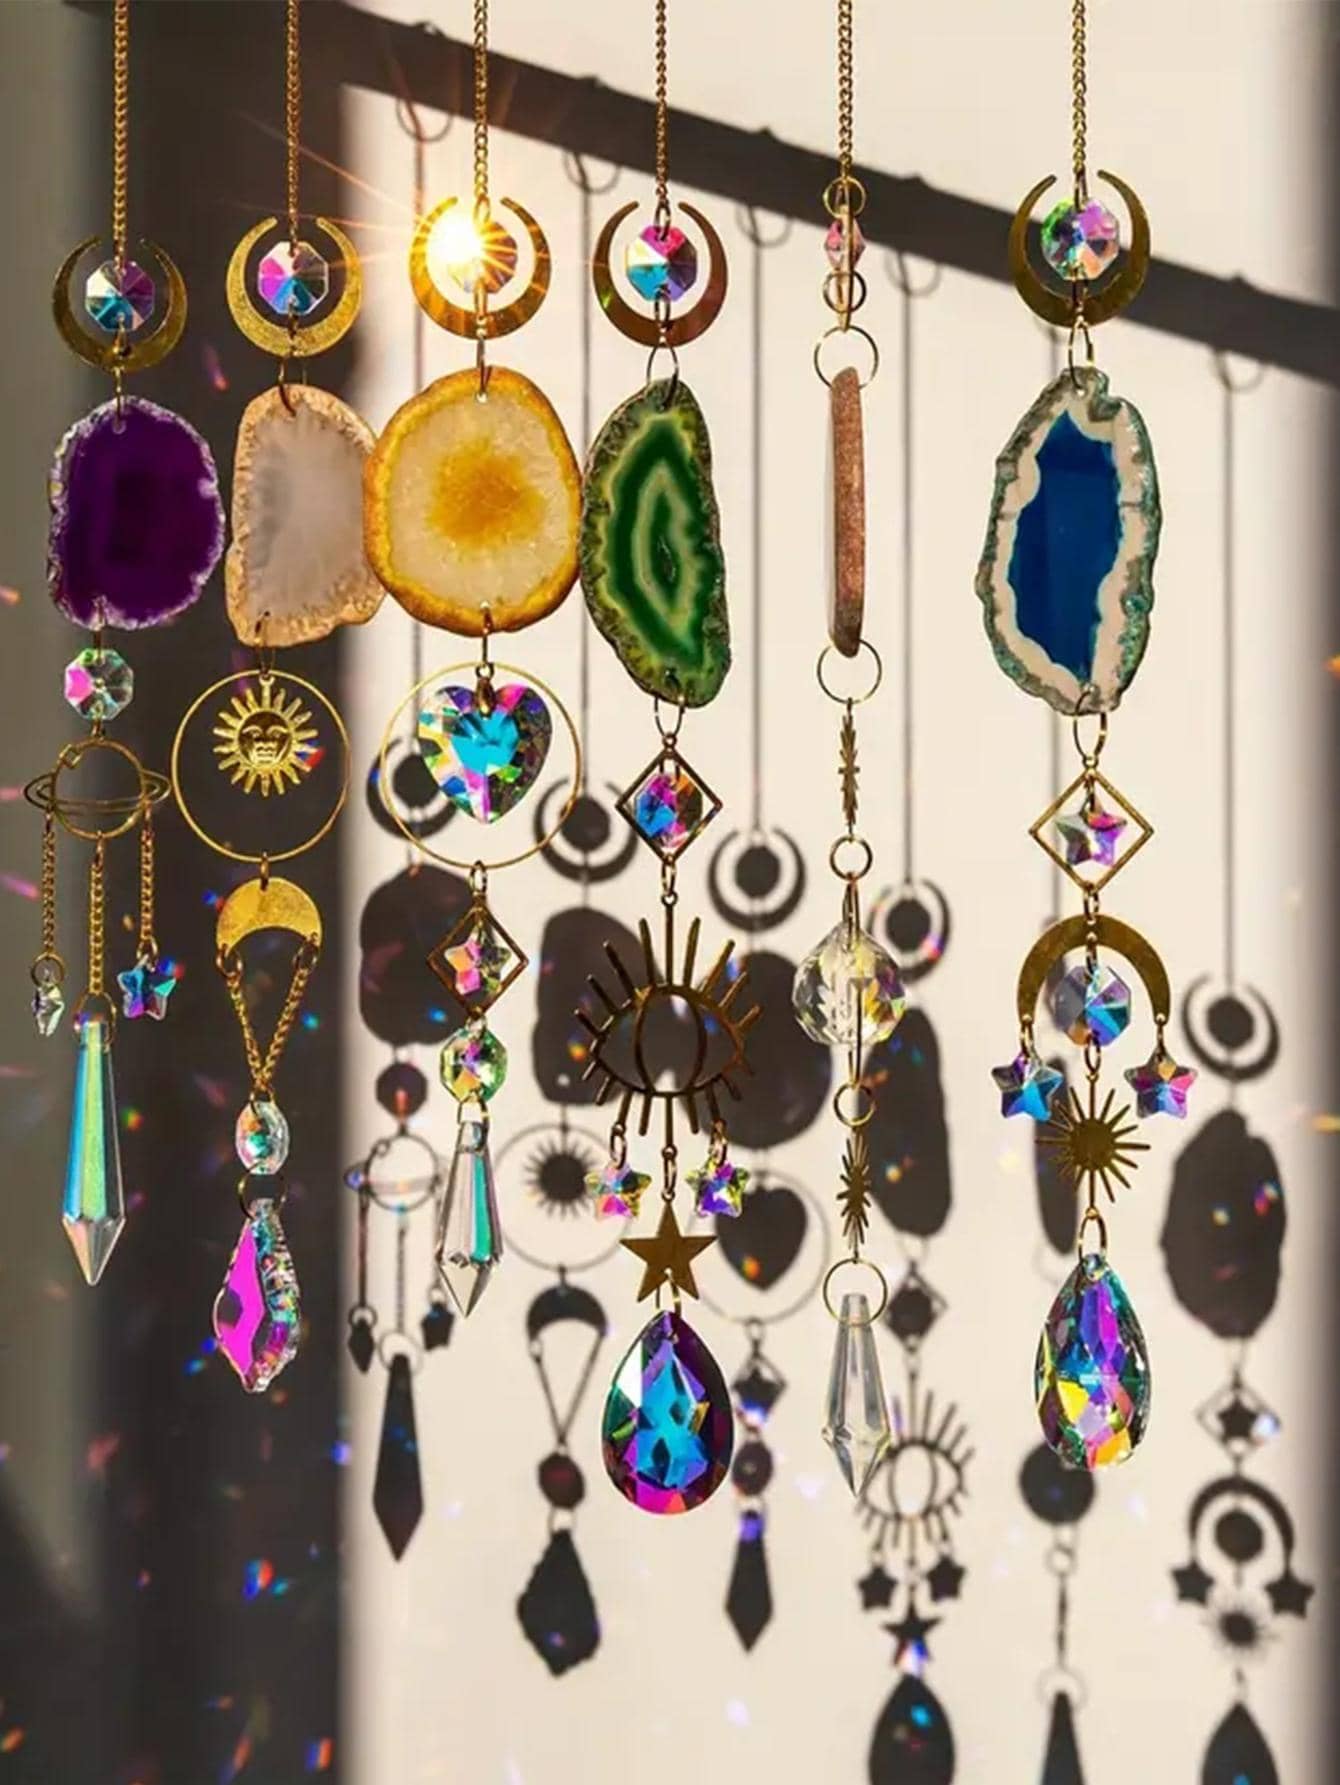 Suncatcher Indoor Window Hanging Sun Catchers With Prisms And Agate Slices For Indoor Outdoor 1pc